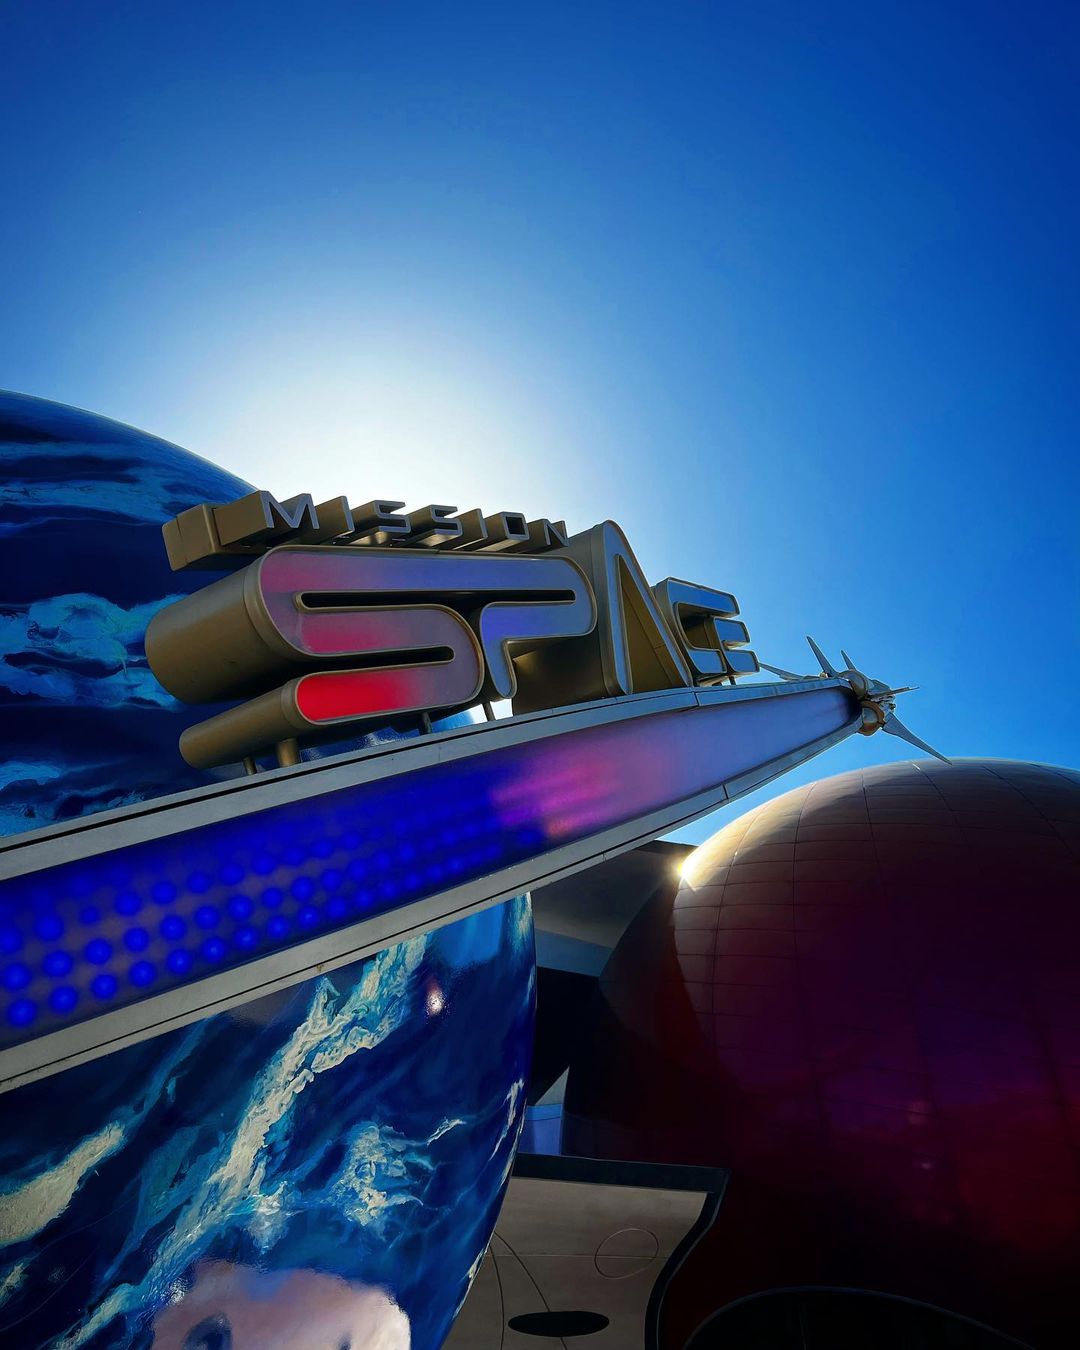  Mission Space - Epcot Attraction